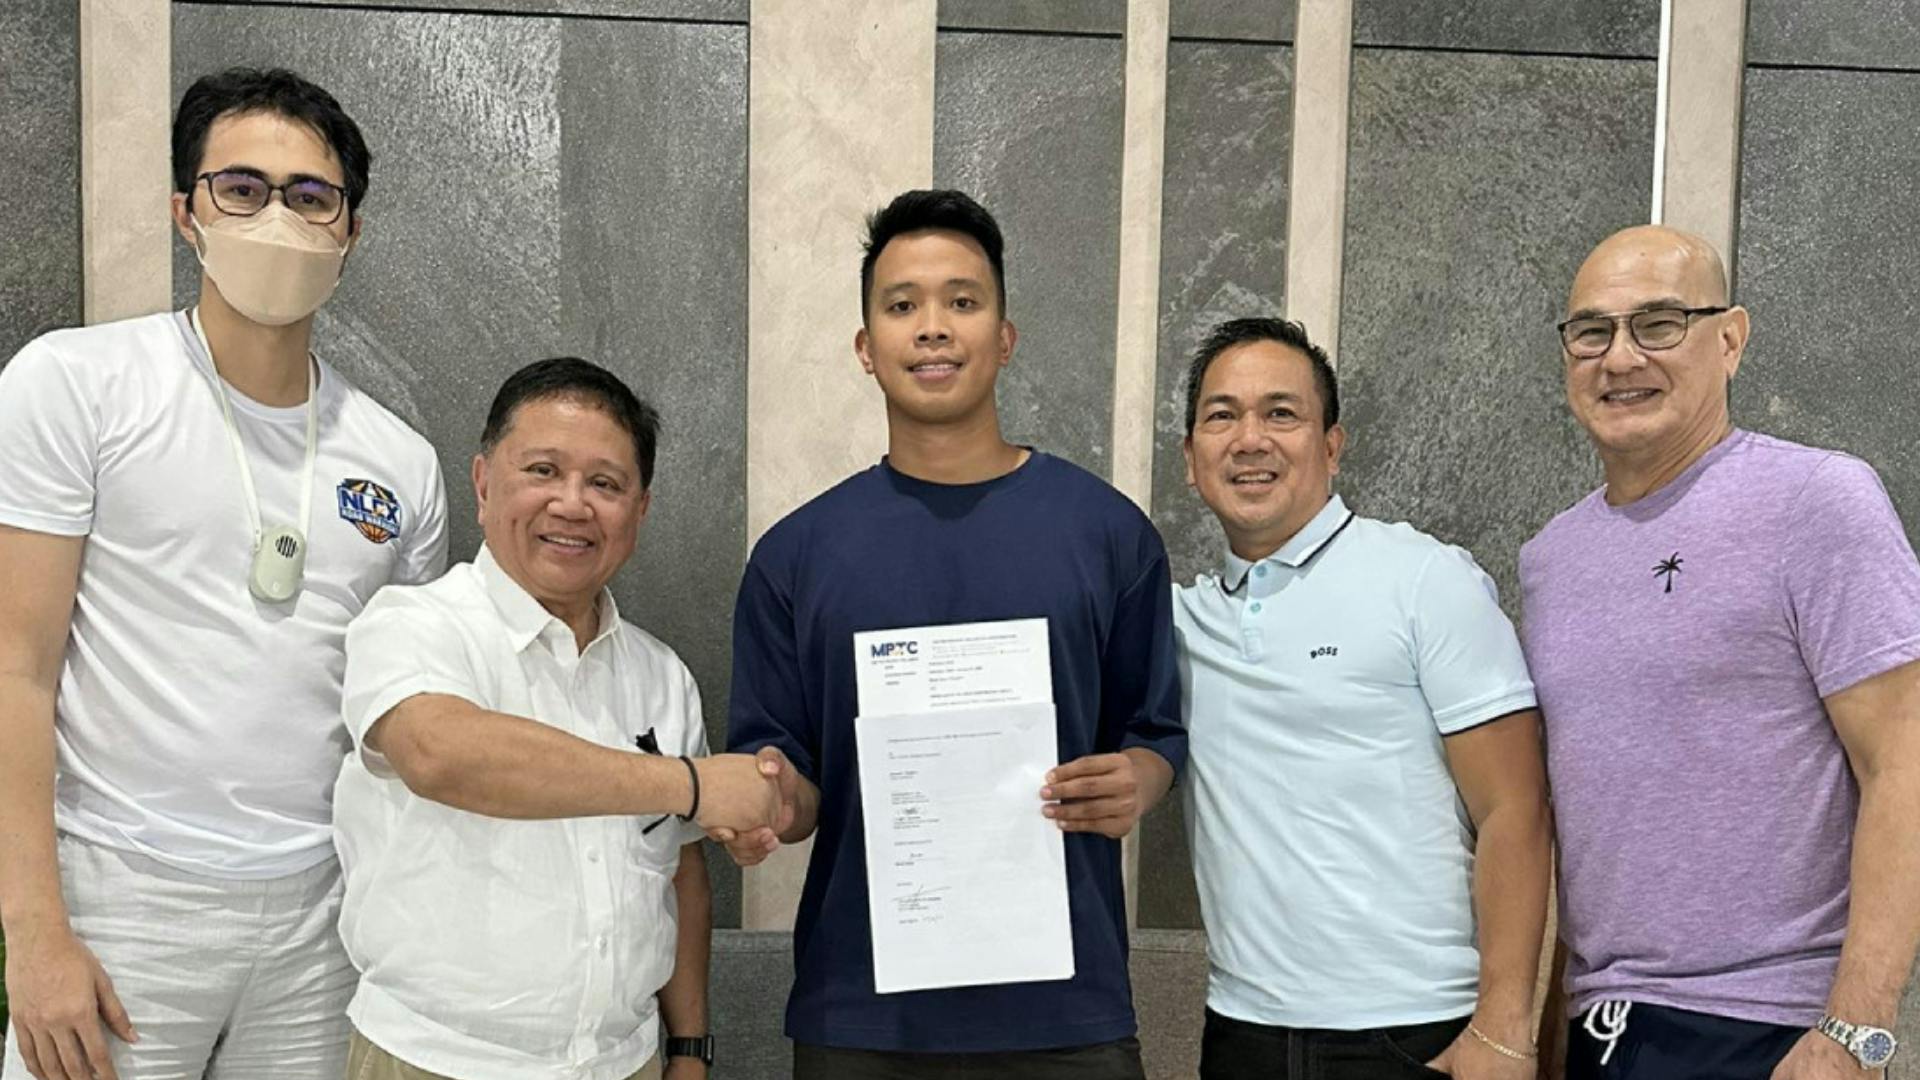 PBA: Hammer time in NLEX as Baser Amer signs to be a Road Warrior